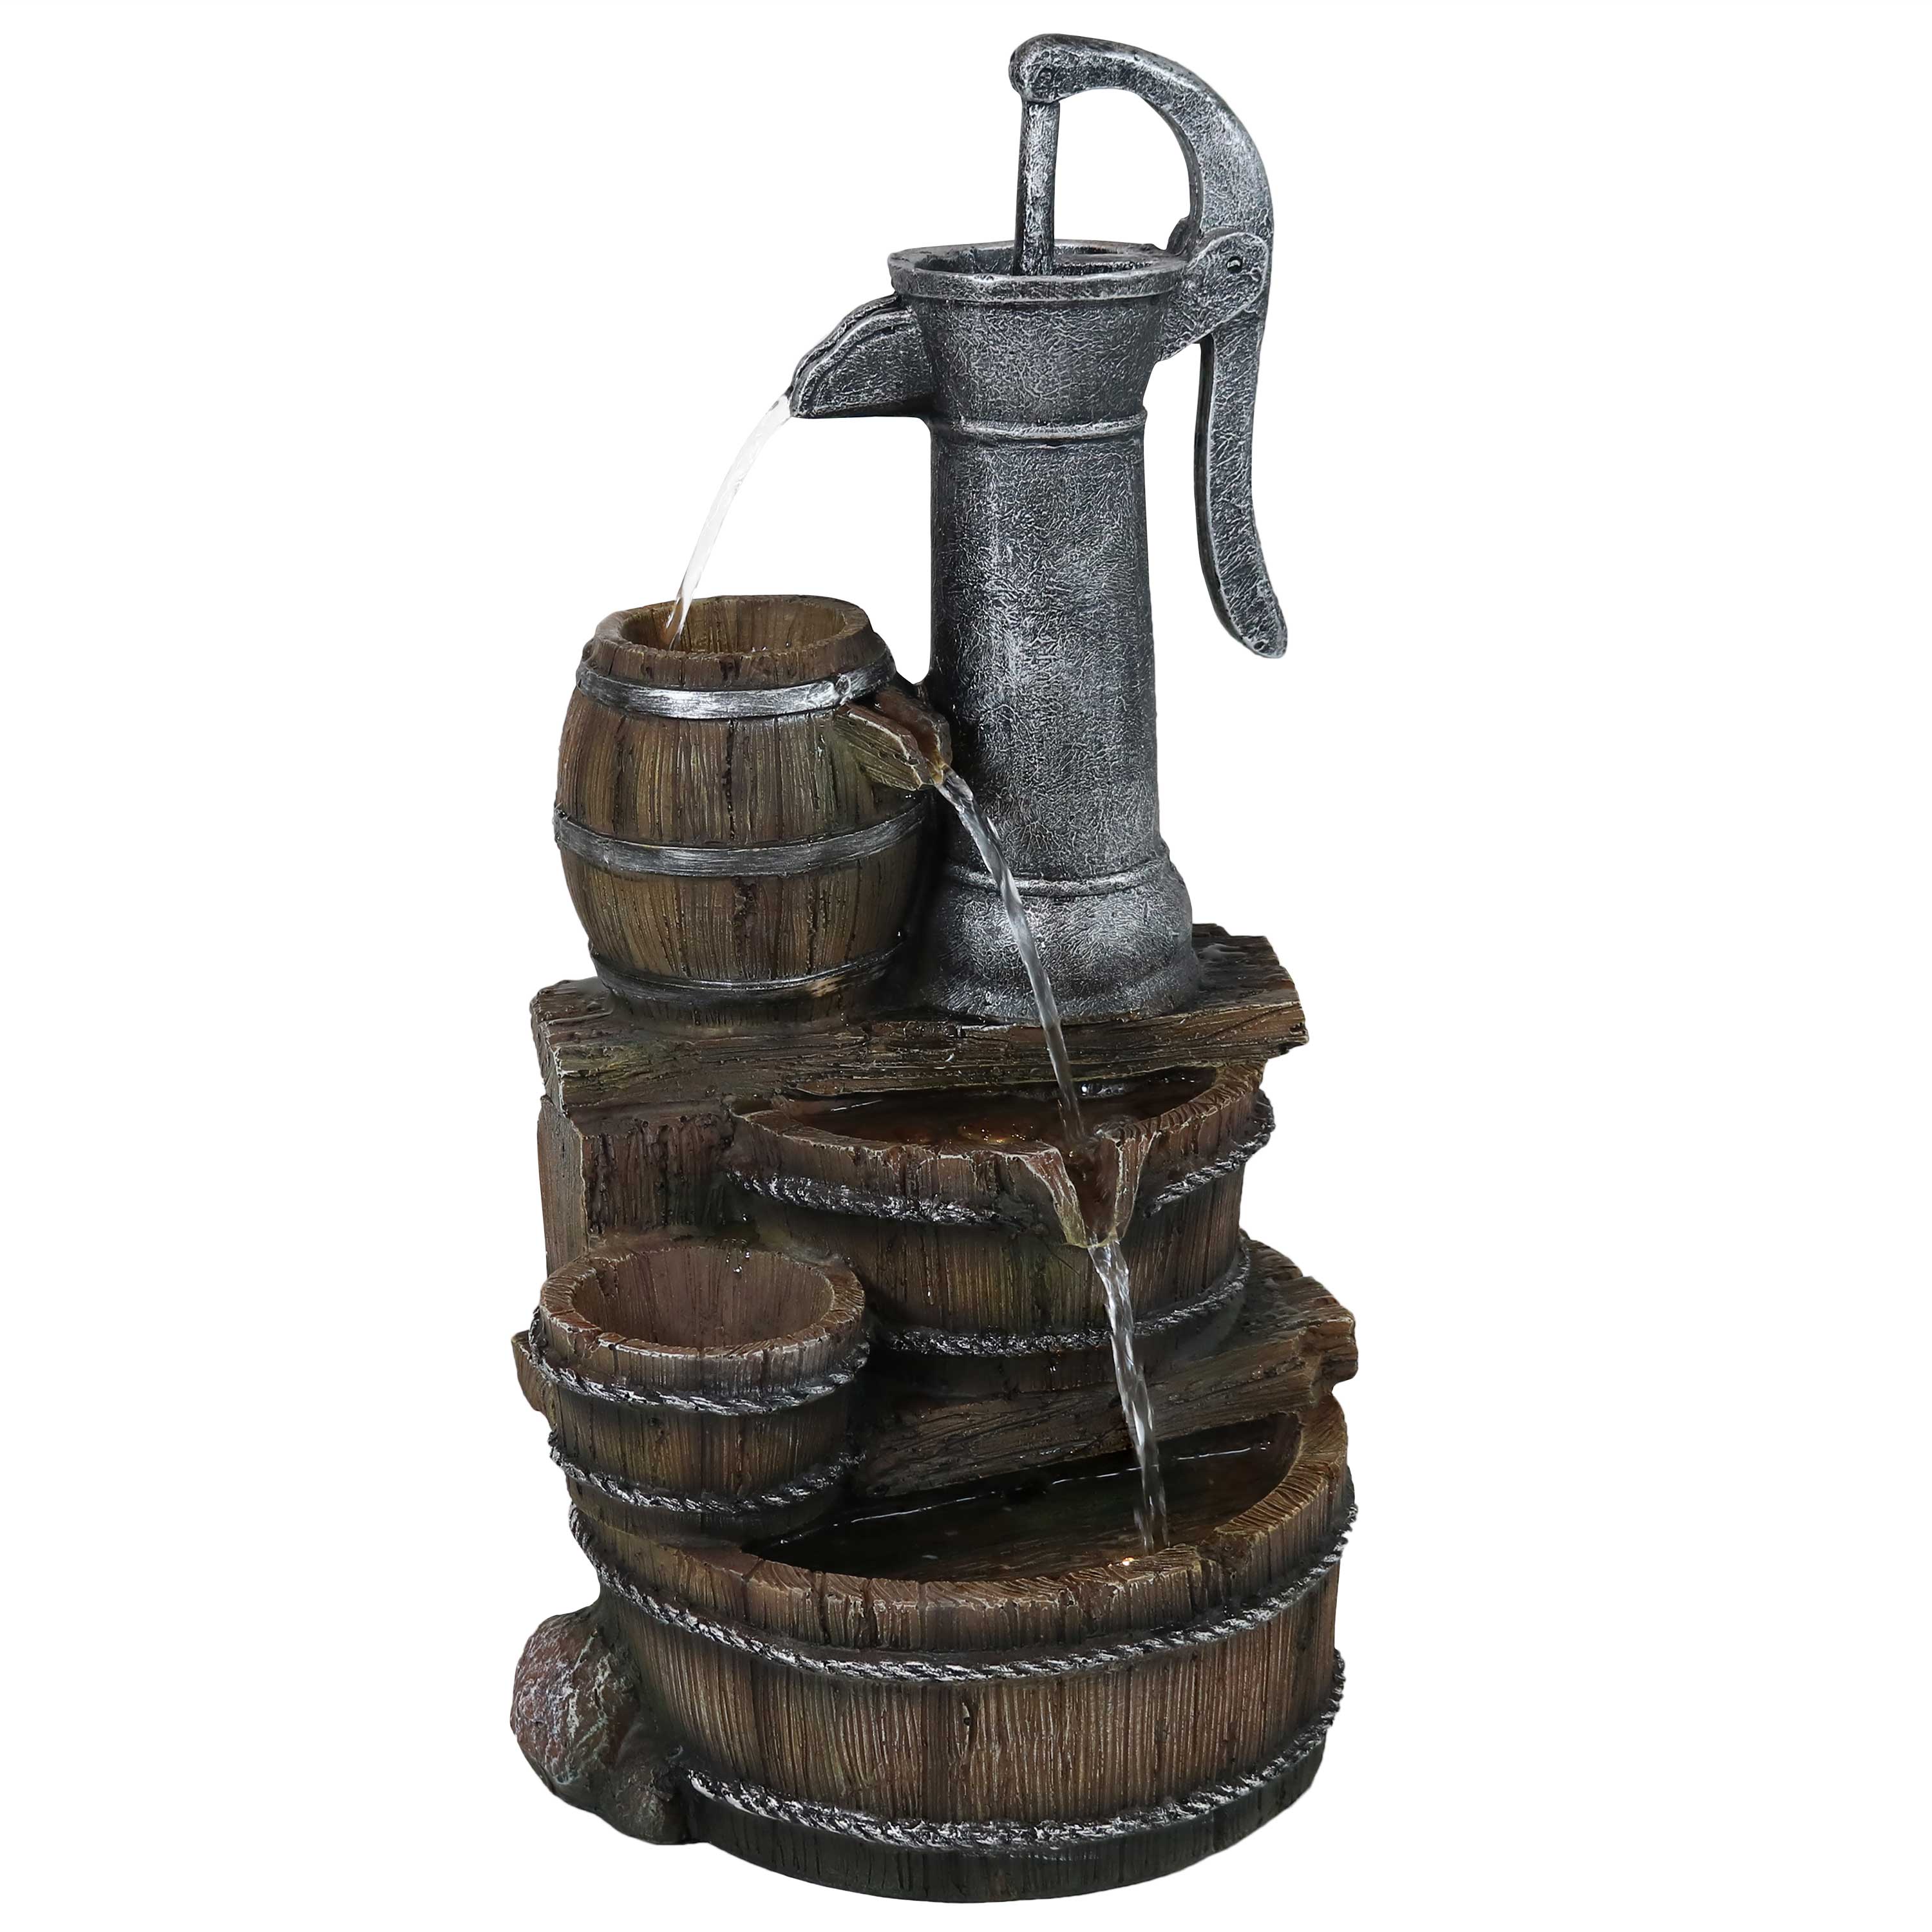 Sunnydaze Cozy Farmhouse Pump and Barrels Water Fountain with LED Lights - 23-Inch